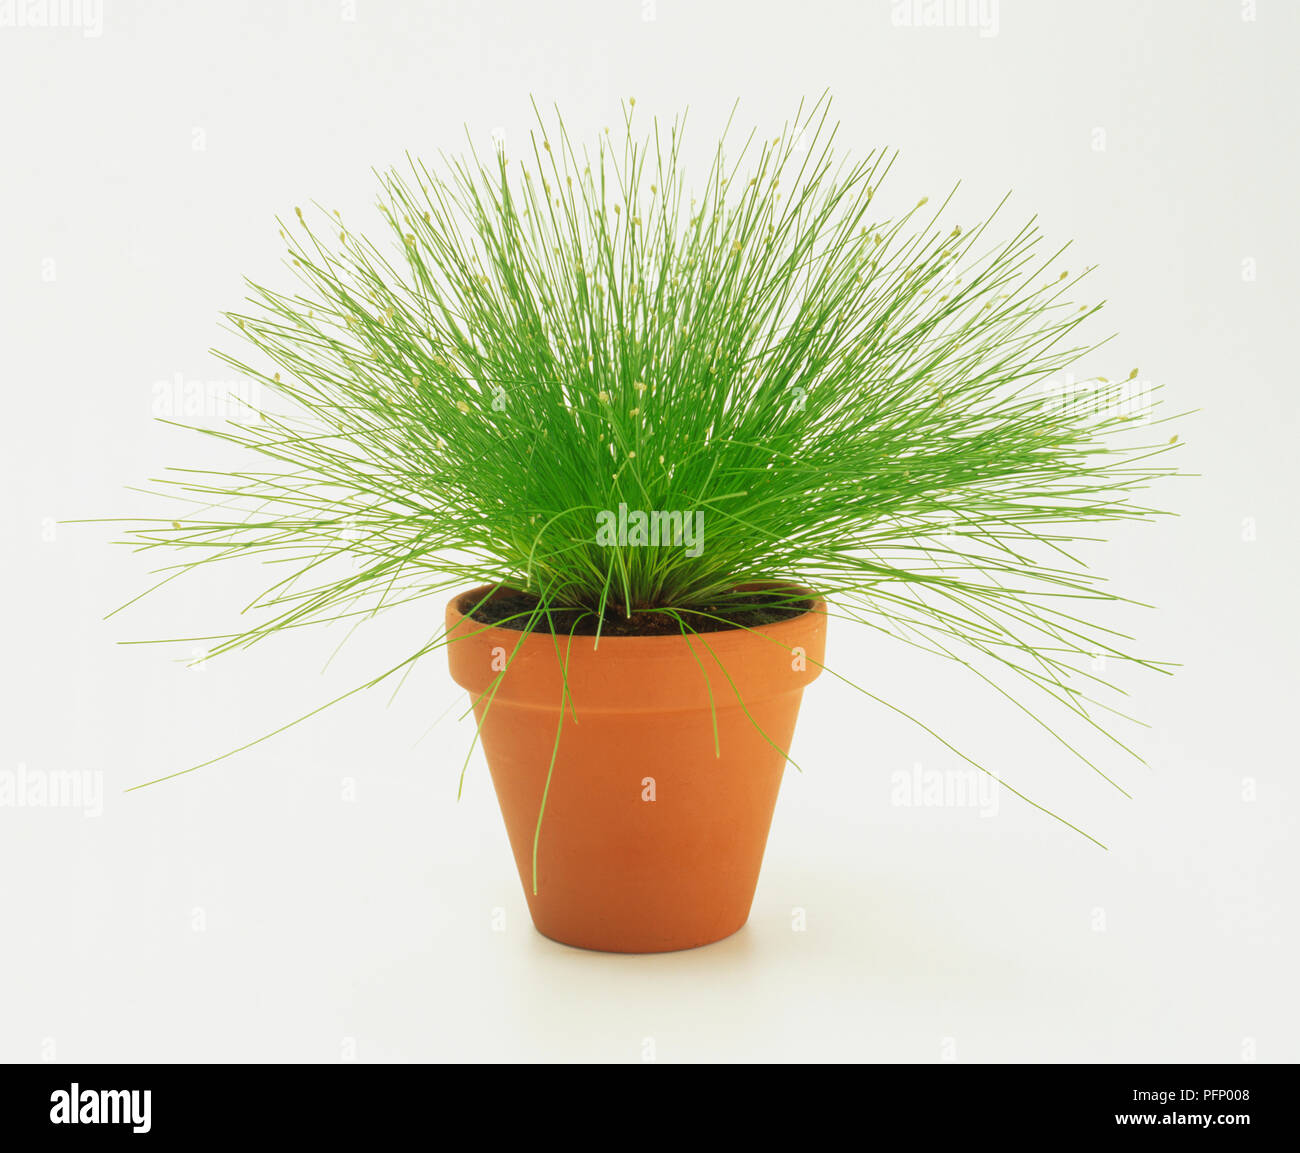 Hairy grass of slender club-rush, Isolepis cernua, in pot. Stock Photo